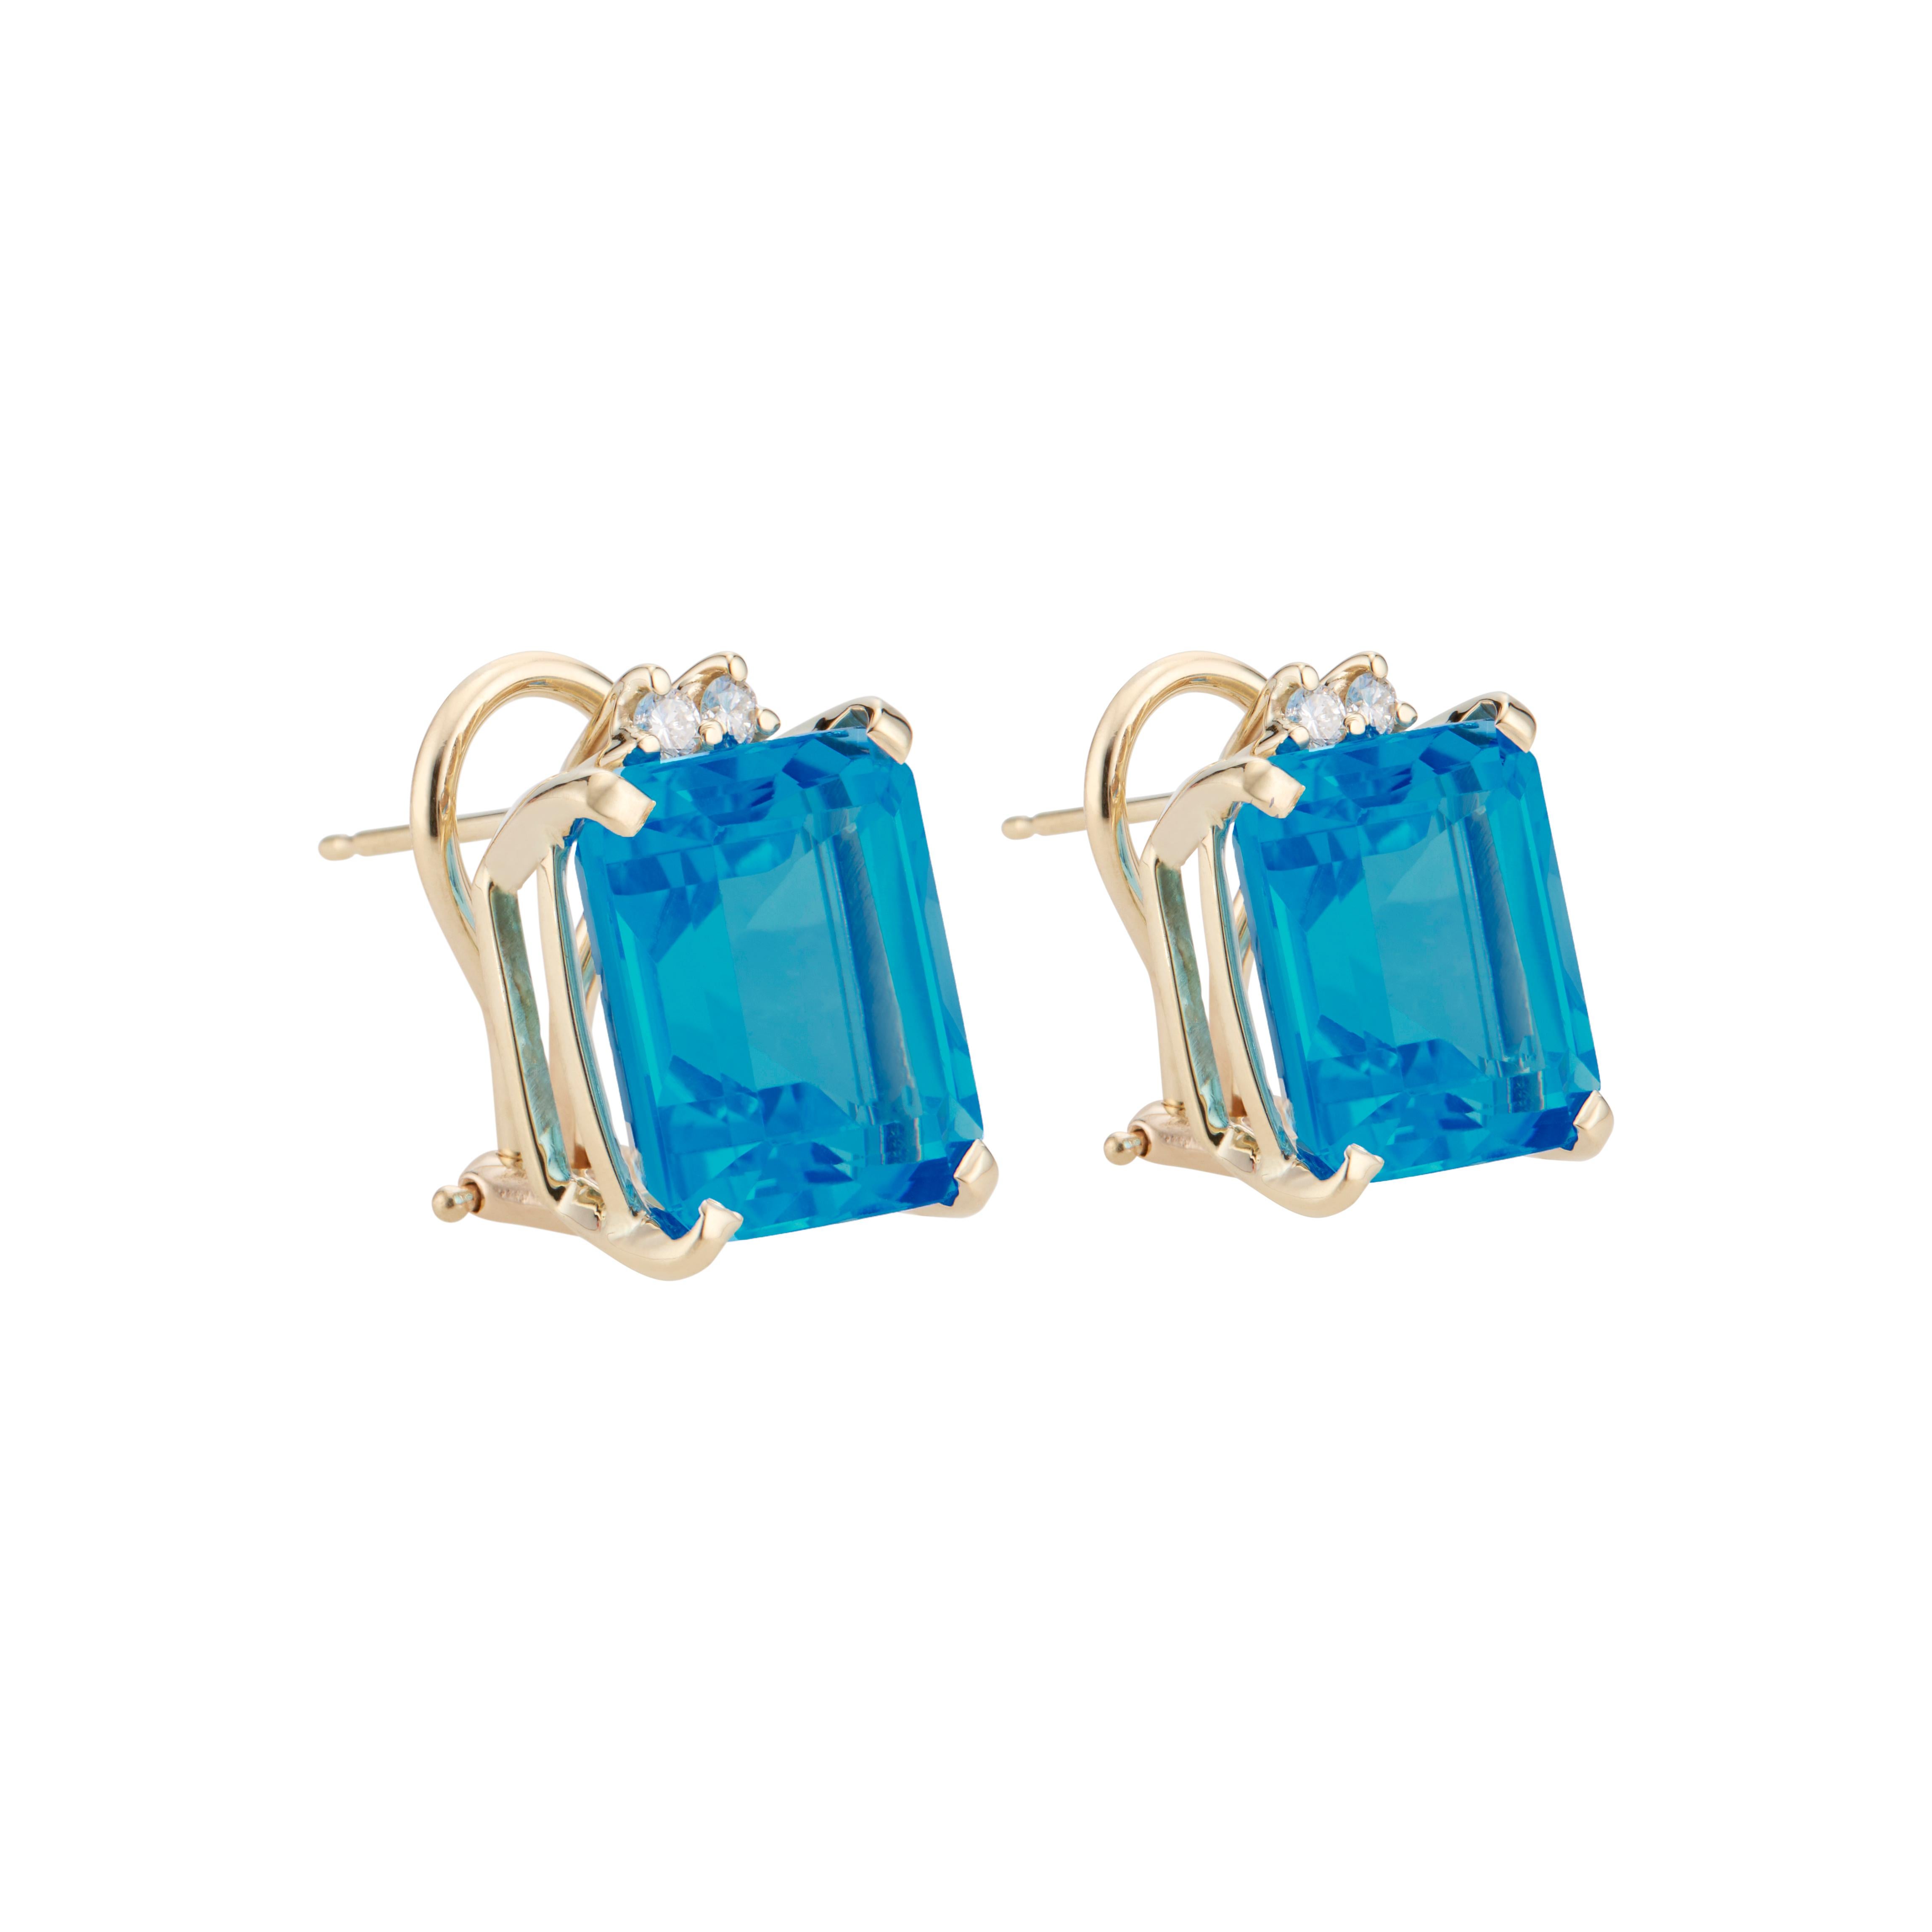 Topaz and diamond dangle earrings. 2 Bright emerald cut blue topaz set in custom made clip post 14k yellow gold settings with 4 round accent diamonds.  

2 rectangular cut blue topaz, approx. 15.005cts
4 round brilliant cut diamonds, G VS approx.